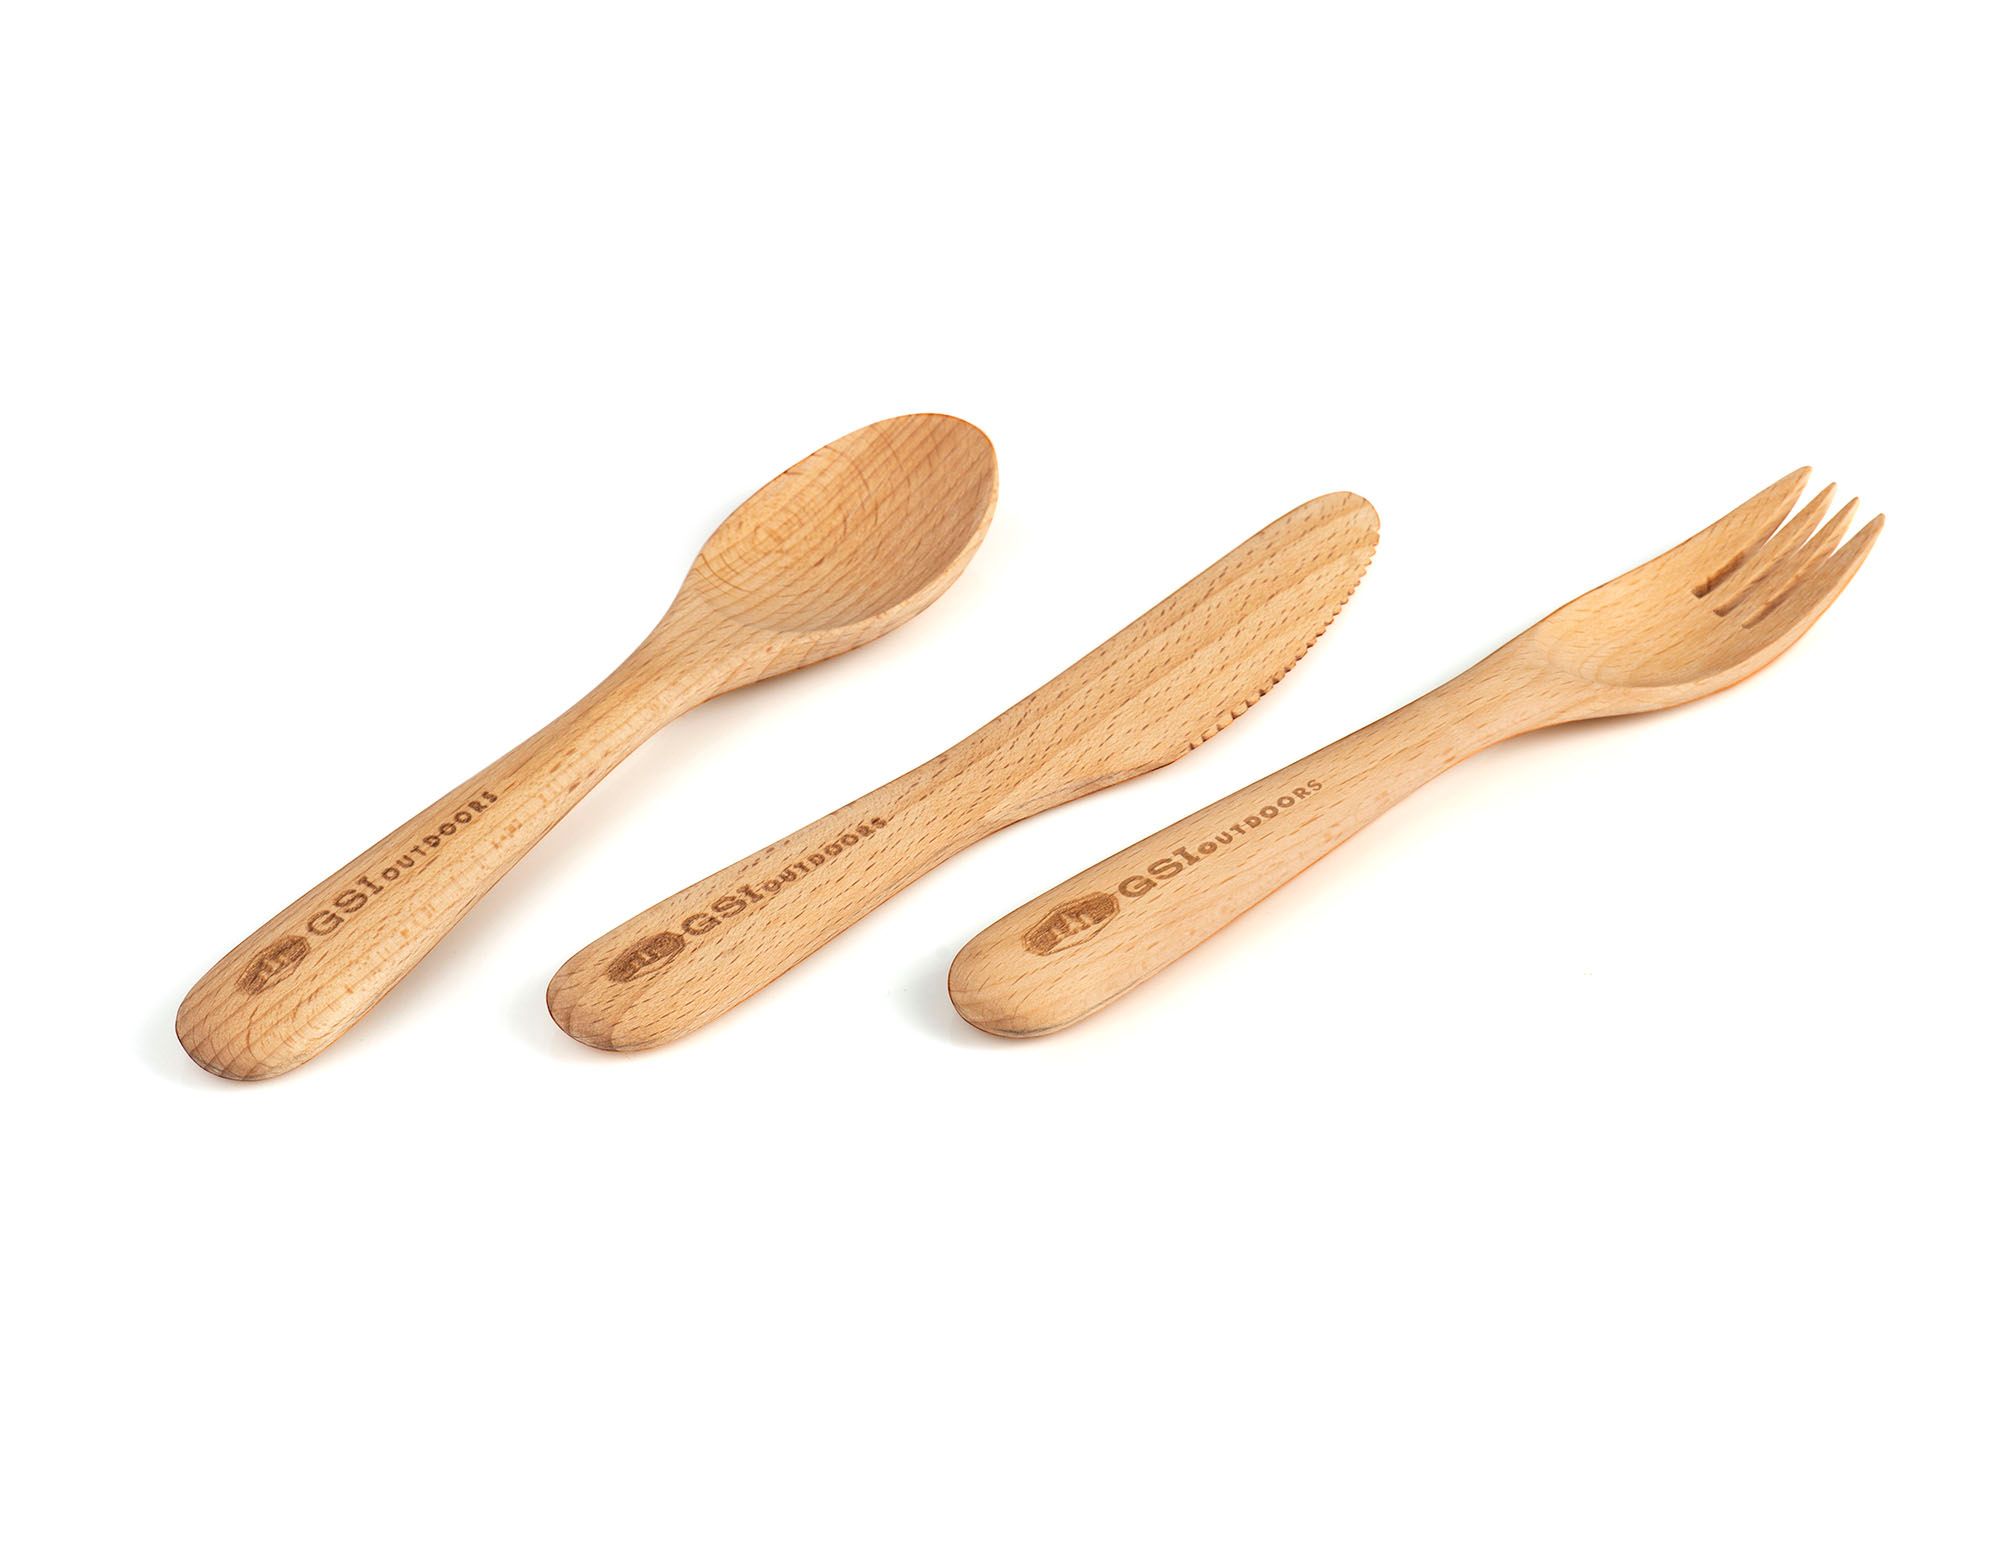 Sustainable Wooden Camping Cutlery from GSI Outdoors